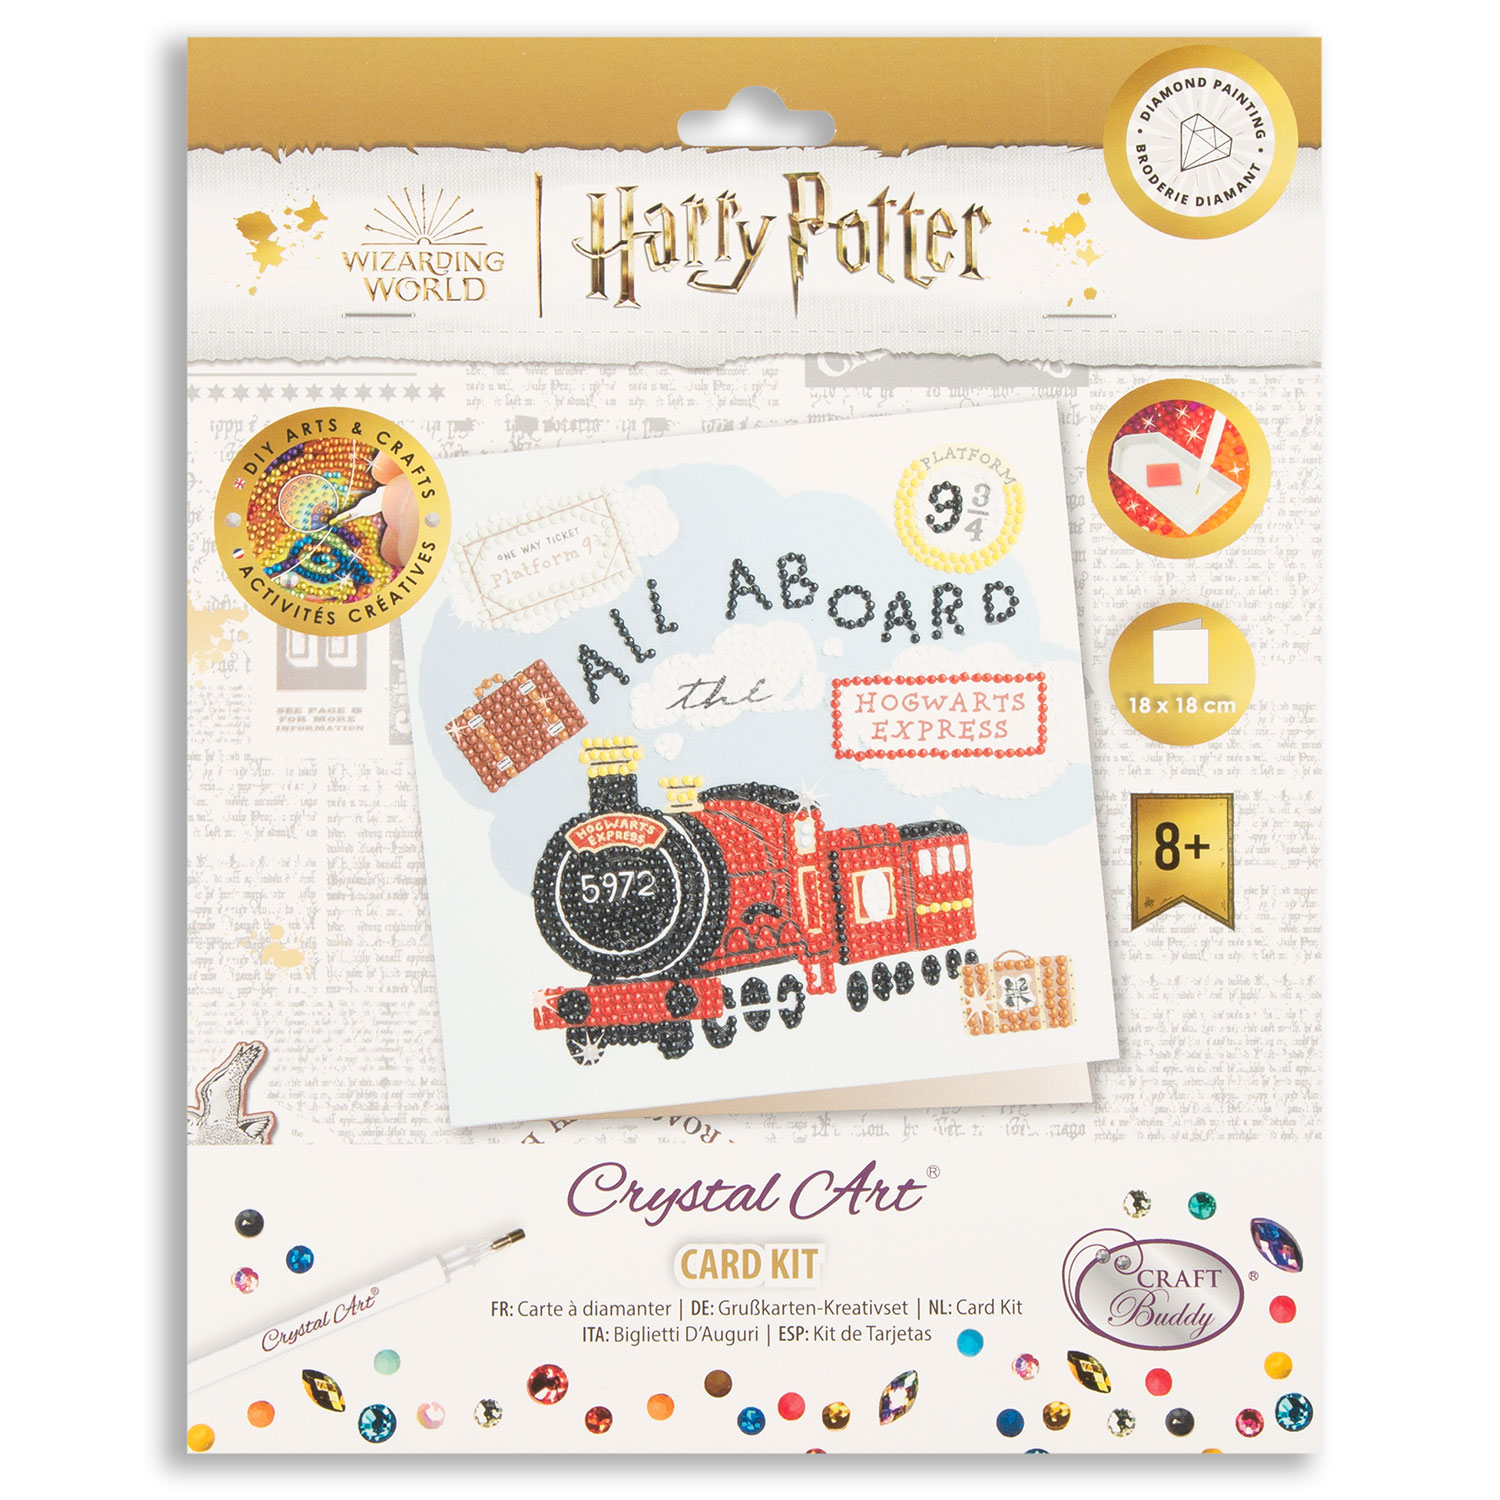 Crystal Art 3 x 18x18cm Harry Potter Cards - Pick n Mix Choose 3  - All About the Hogwarts Express